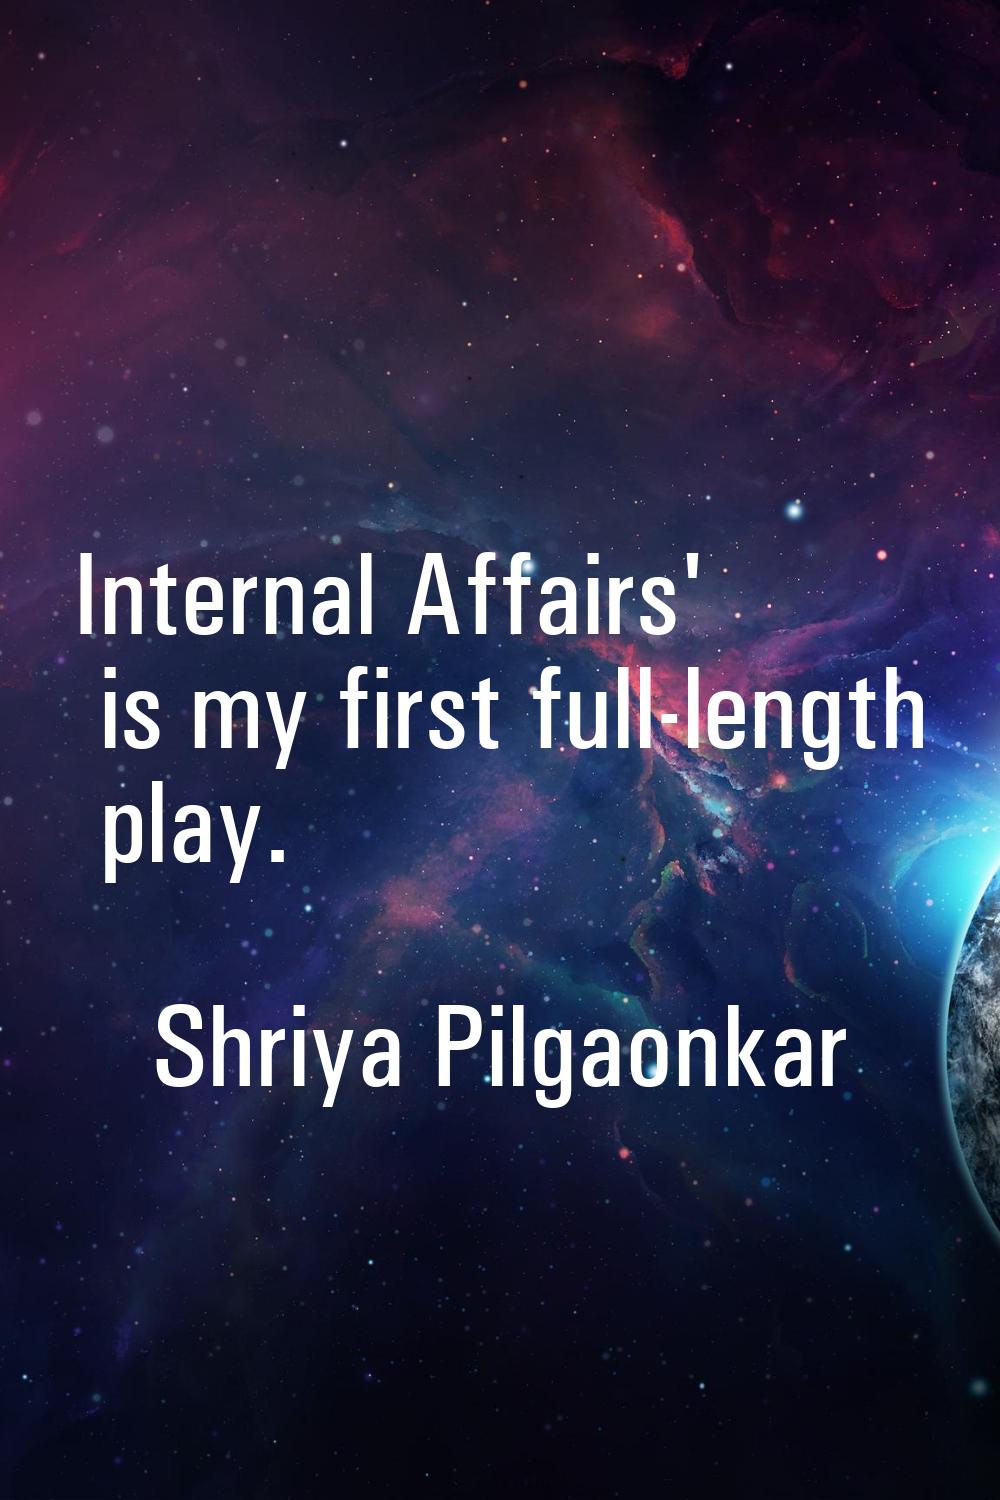 Internal Affairs' is my first full-length play.